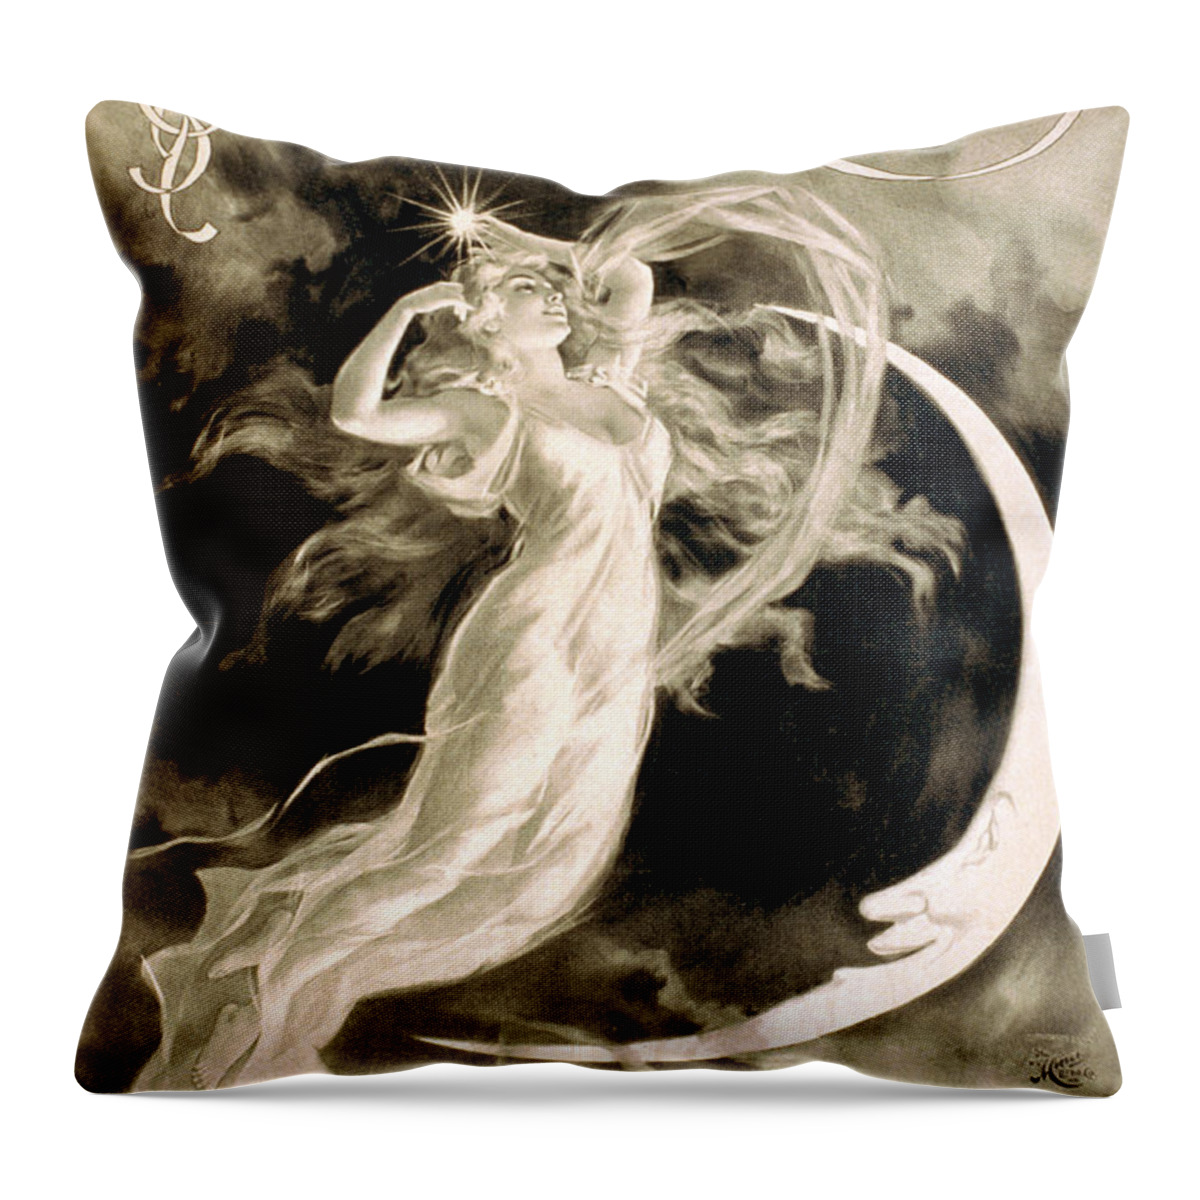 Entertainment Throw Pillow featuring the photograph Alexander Herrmann, French Magician by Photo Researchers